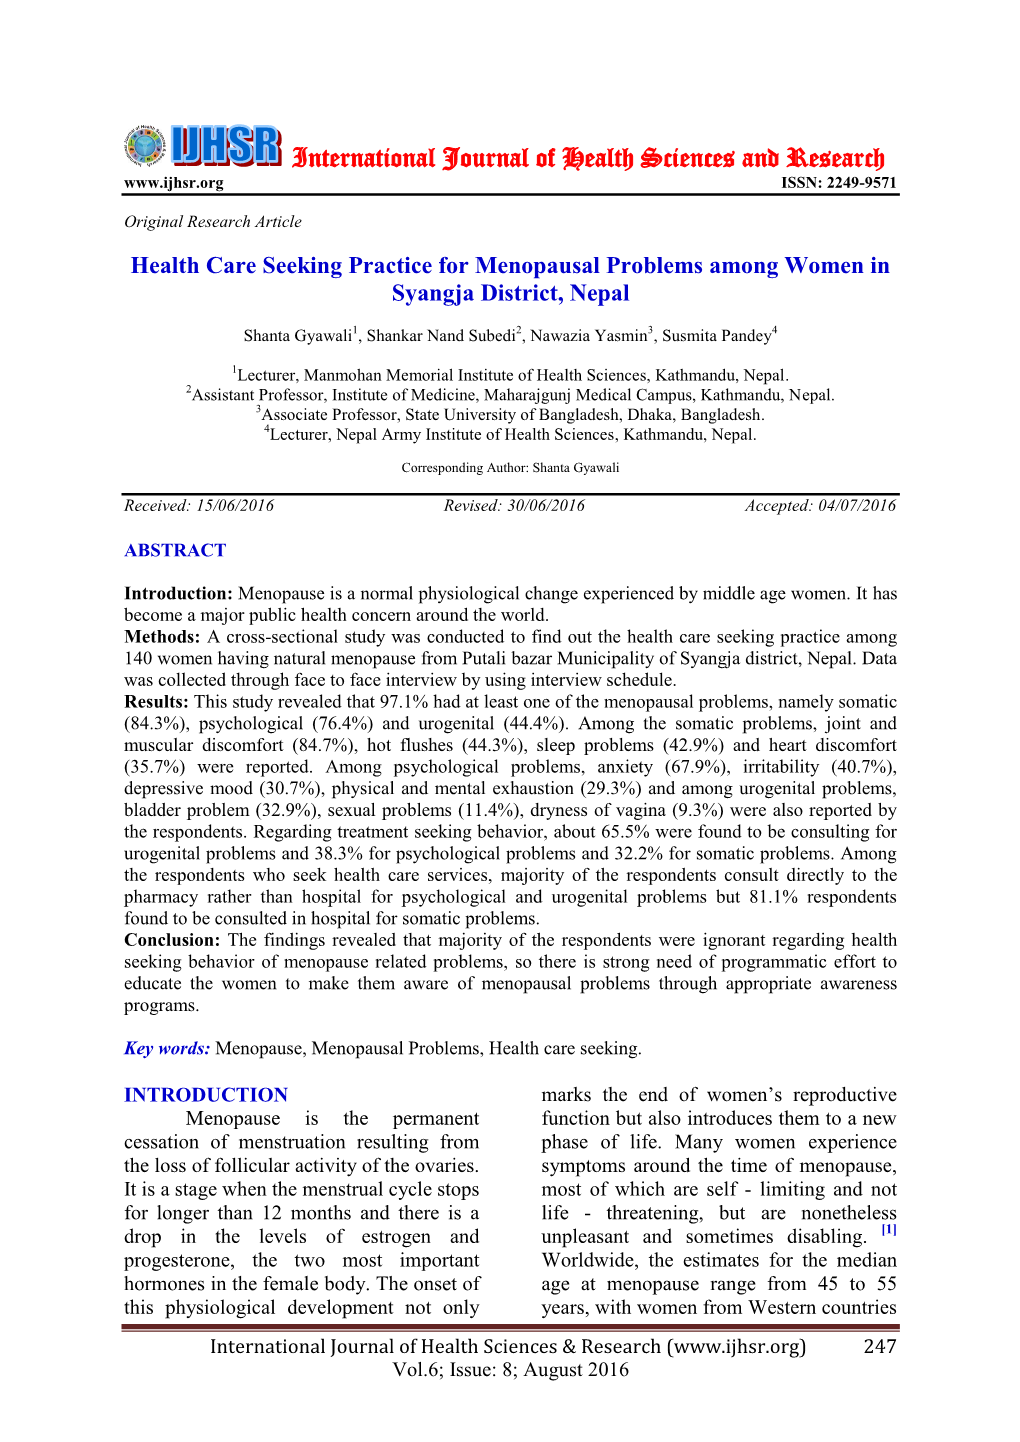 Health Care Seeking Practice for Menopausal Problems Among Women in Syangja District, Nepal